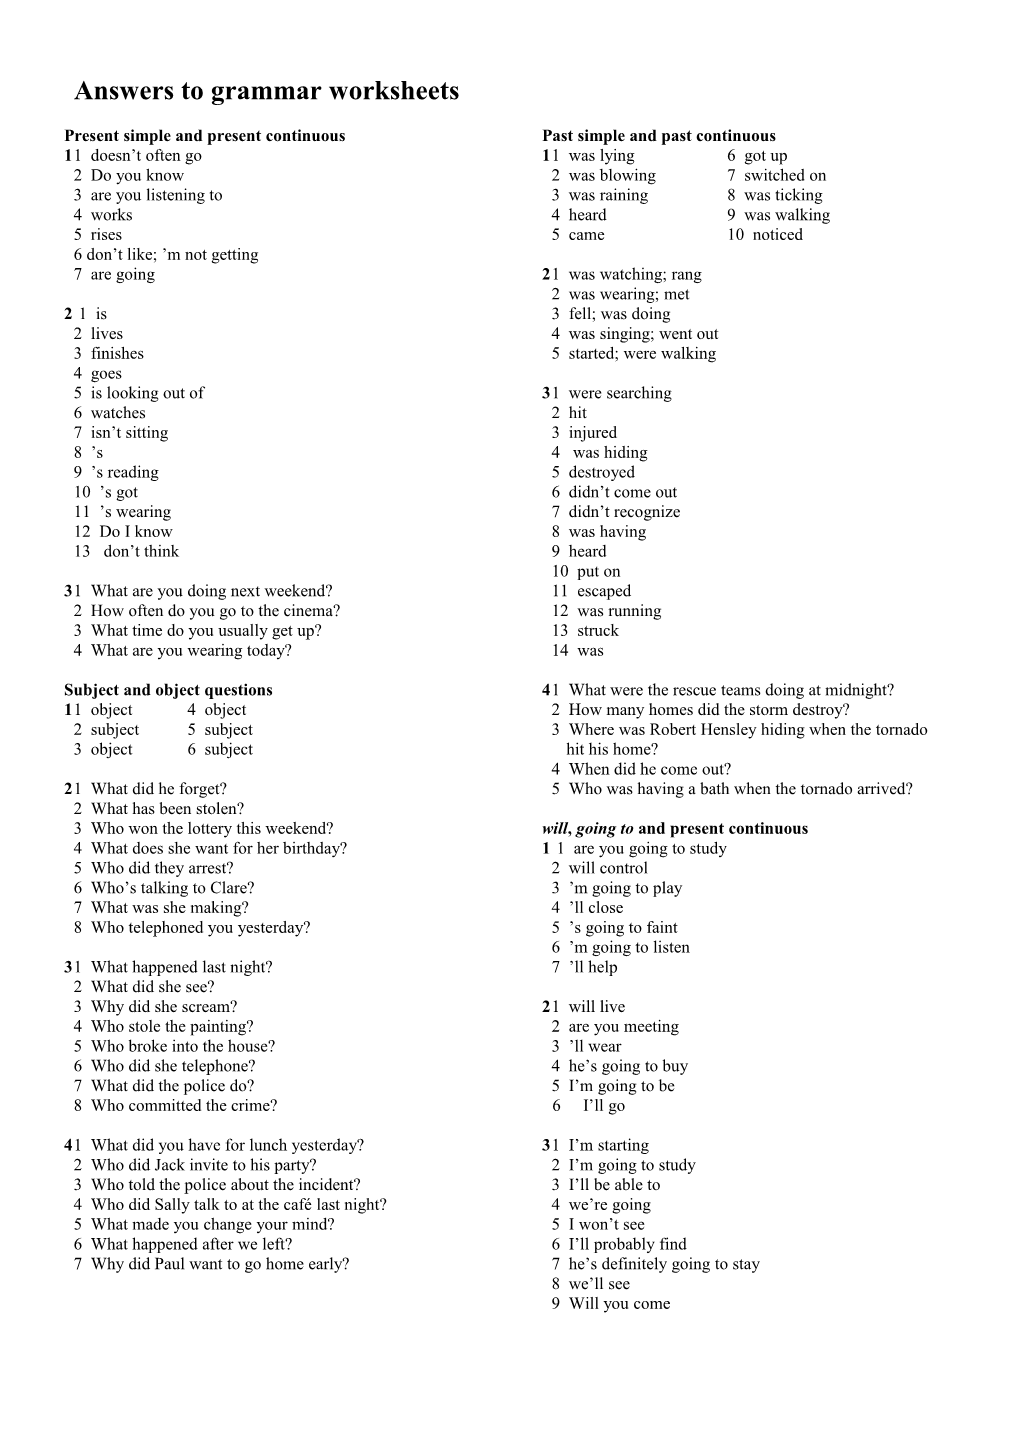 Answers to Grammar Worksheets